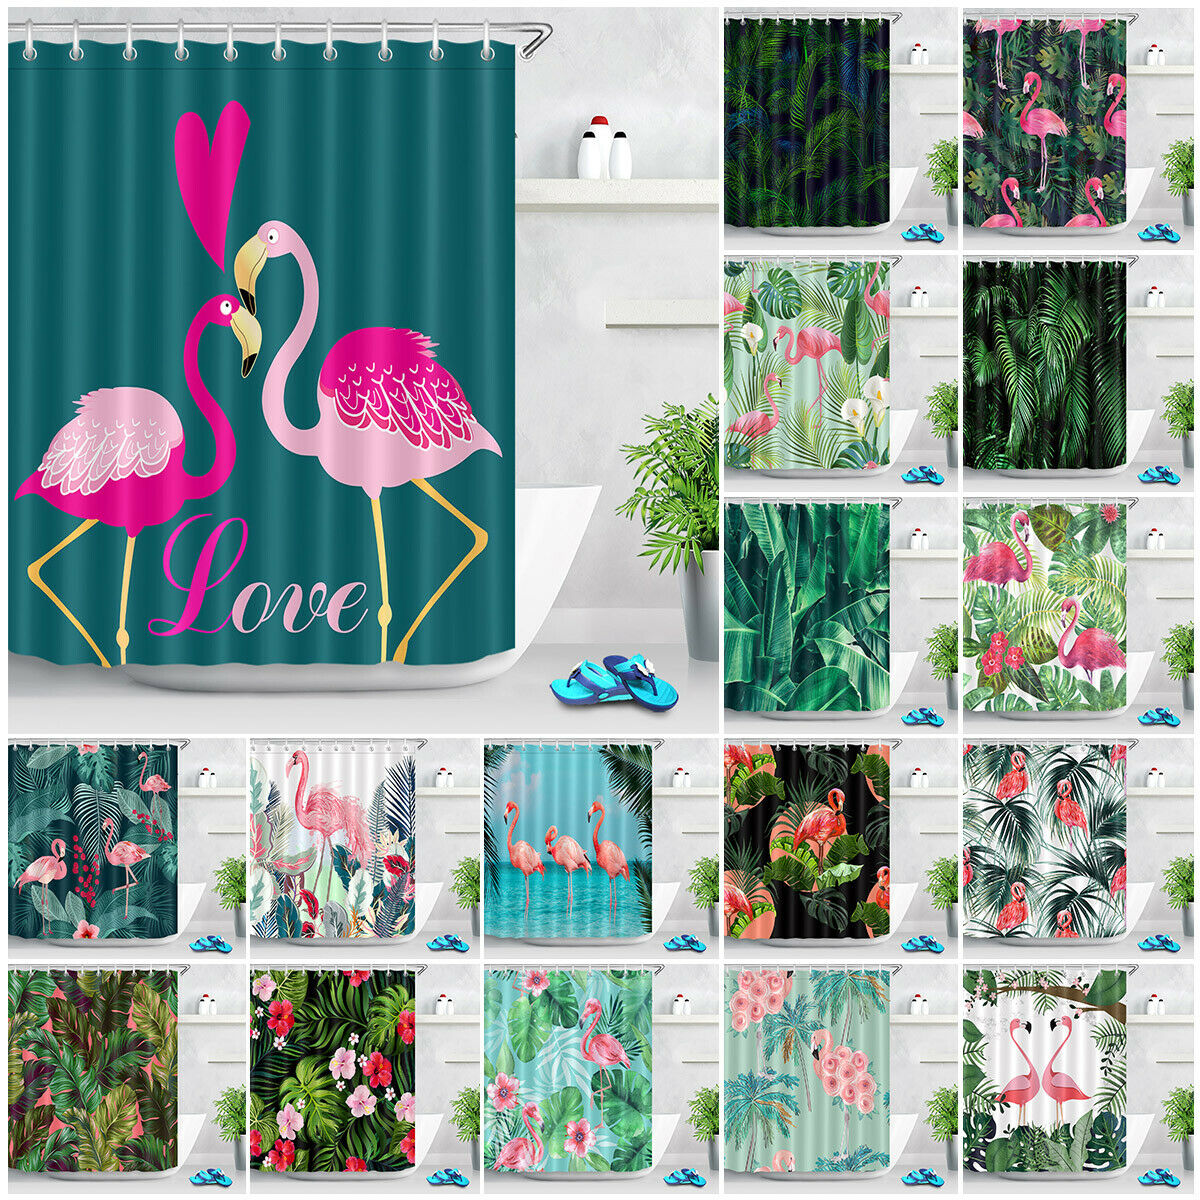 Buy Online Green Leaf Shower Curtain Sets Tropical Palm Leaves Flowers Flamingo Bathroom Decor Waterproof Fabric Bath Curtains With Hooks Alitools